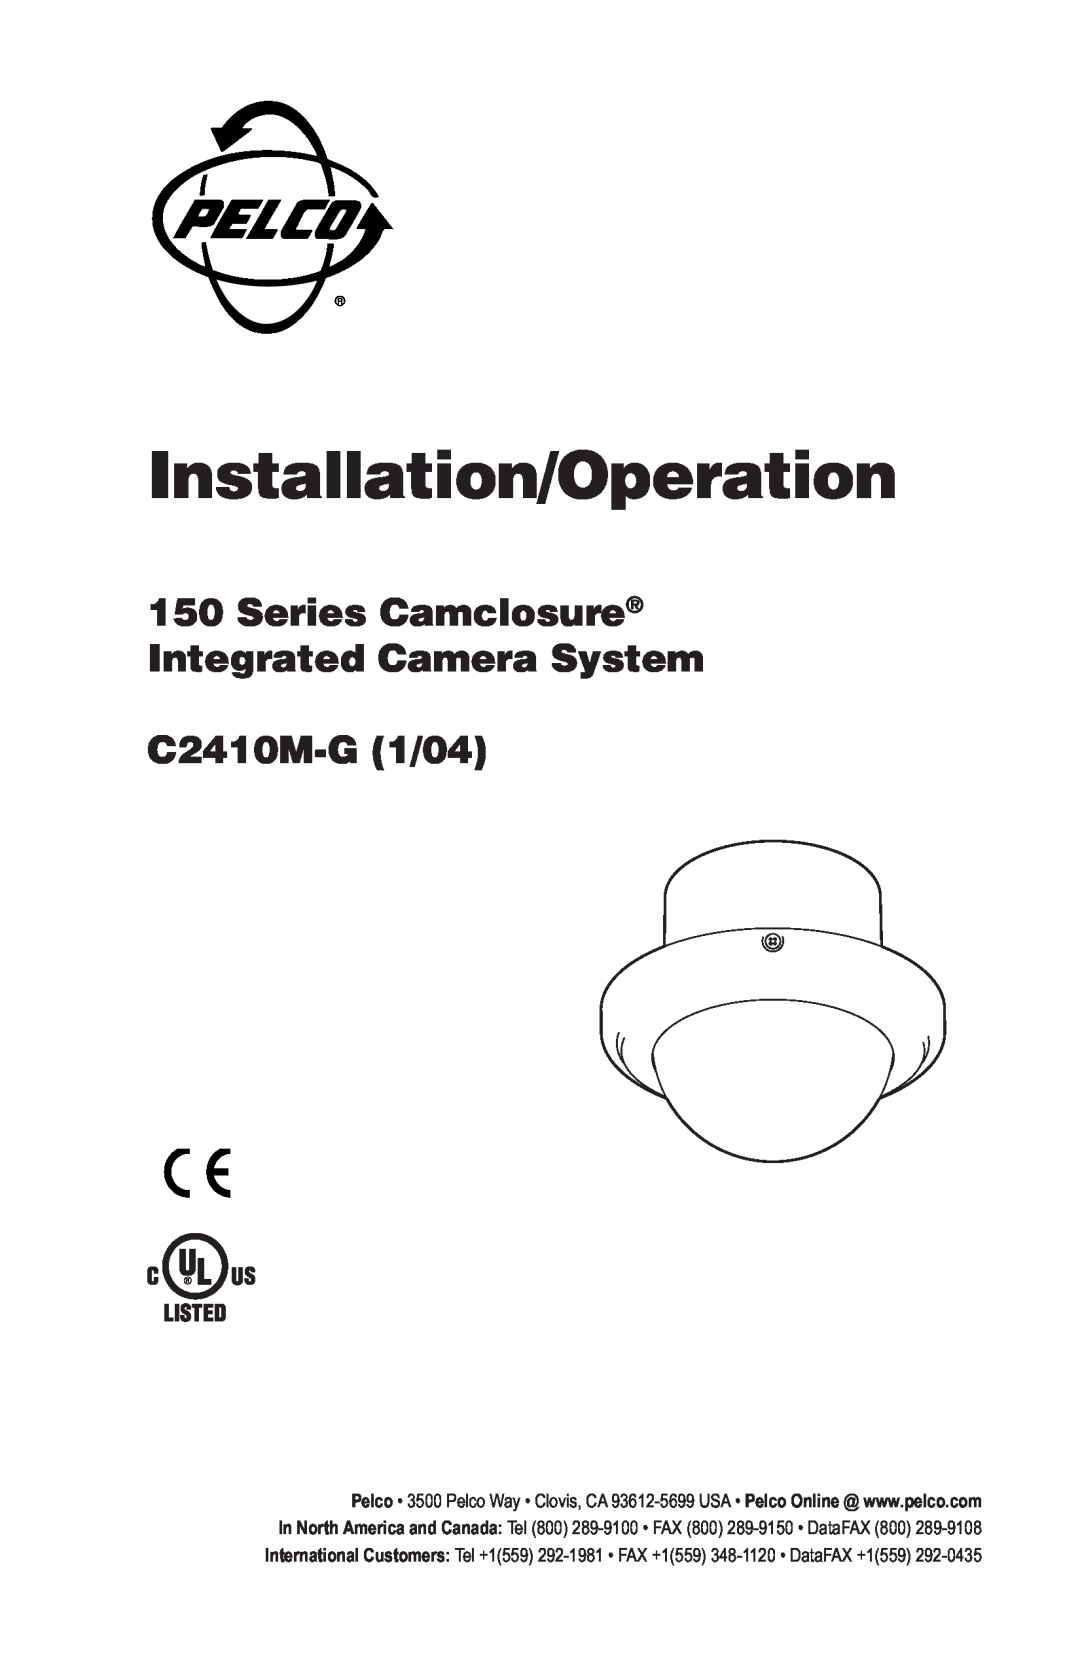 Pelco manual Installation/Operation, Series Camclosure Integrated Camera System, C2410M-G1/04 